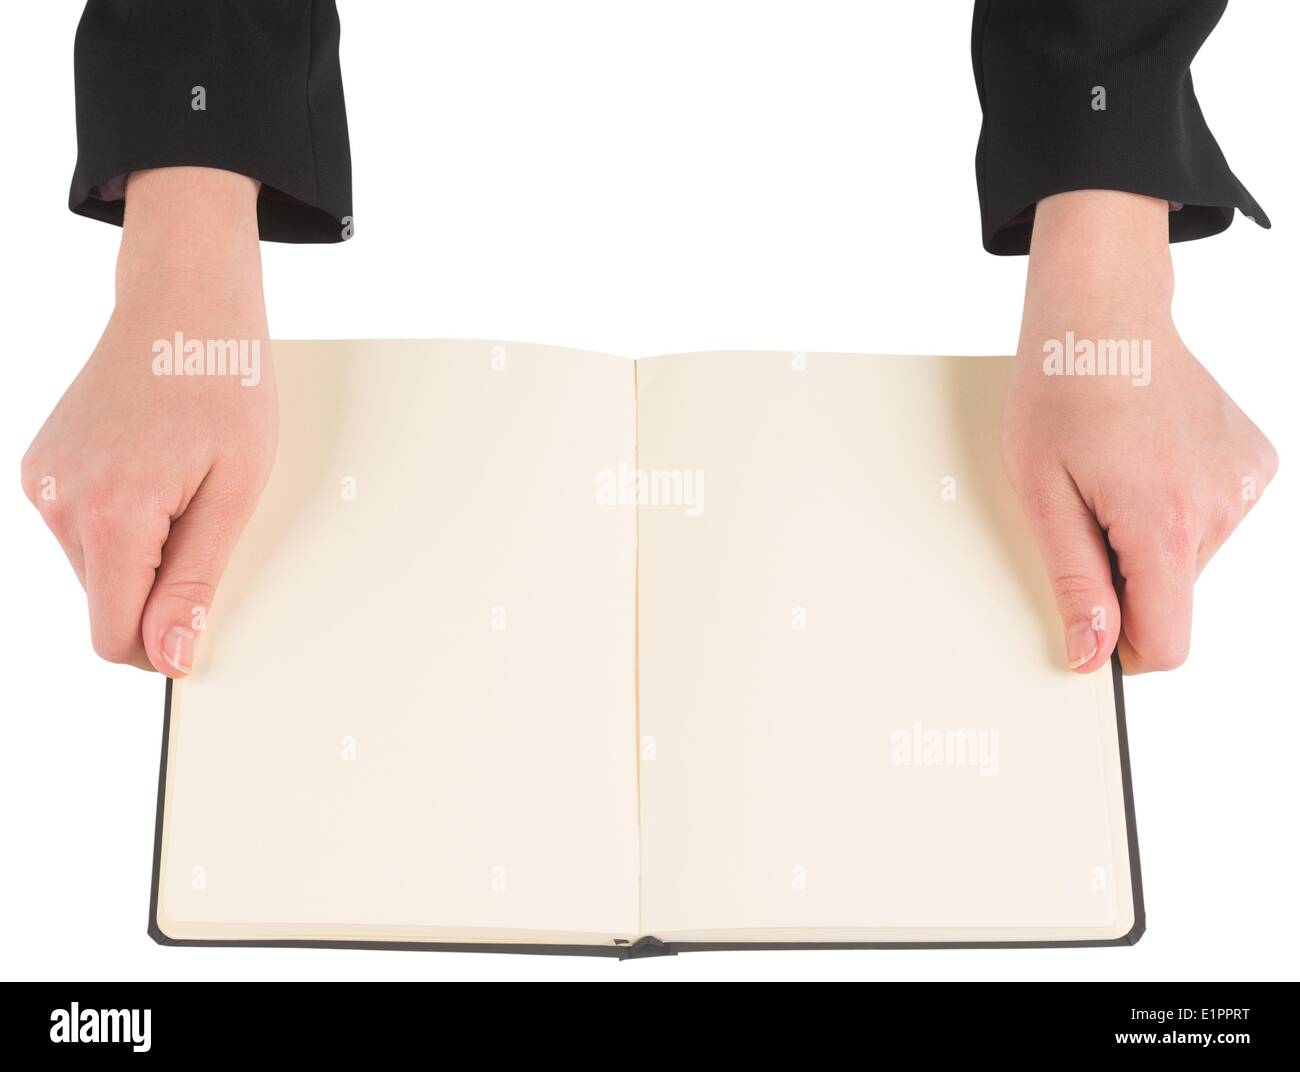 Hands holding an open empty book background Stock Photo by BrianAJackson